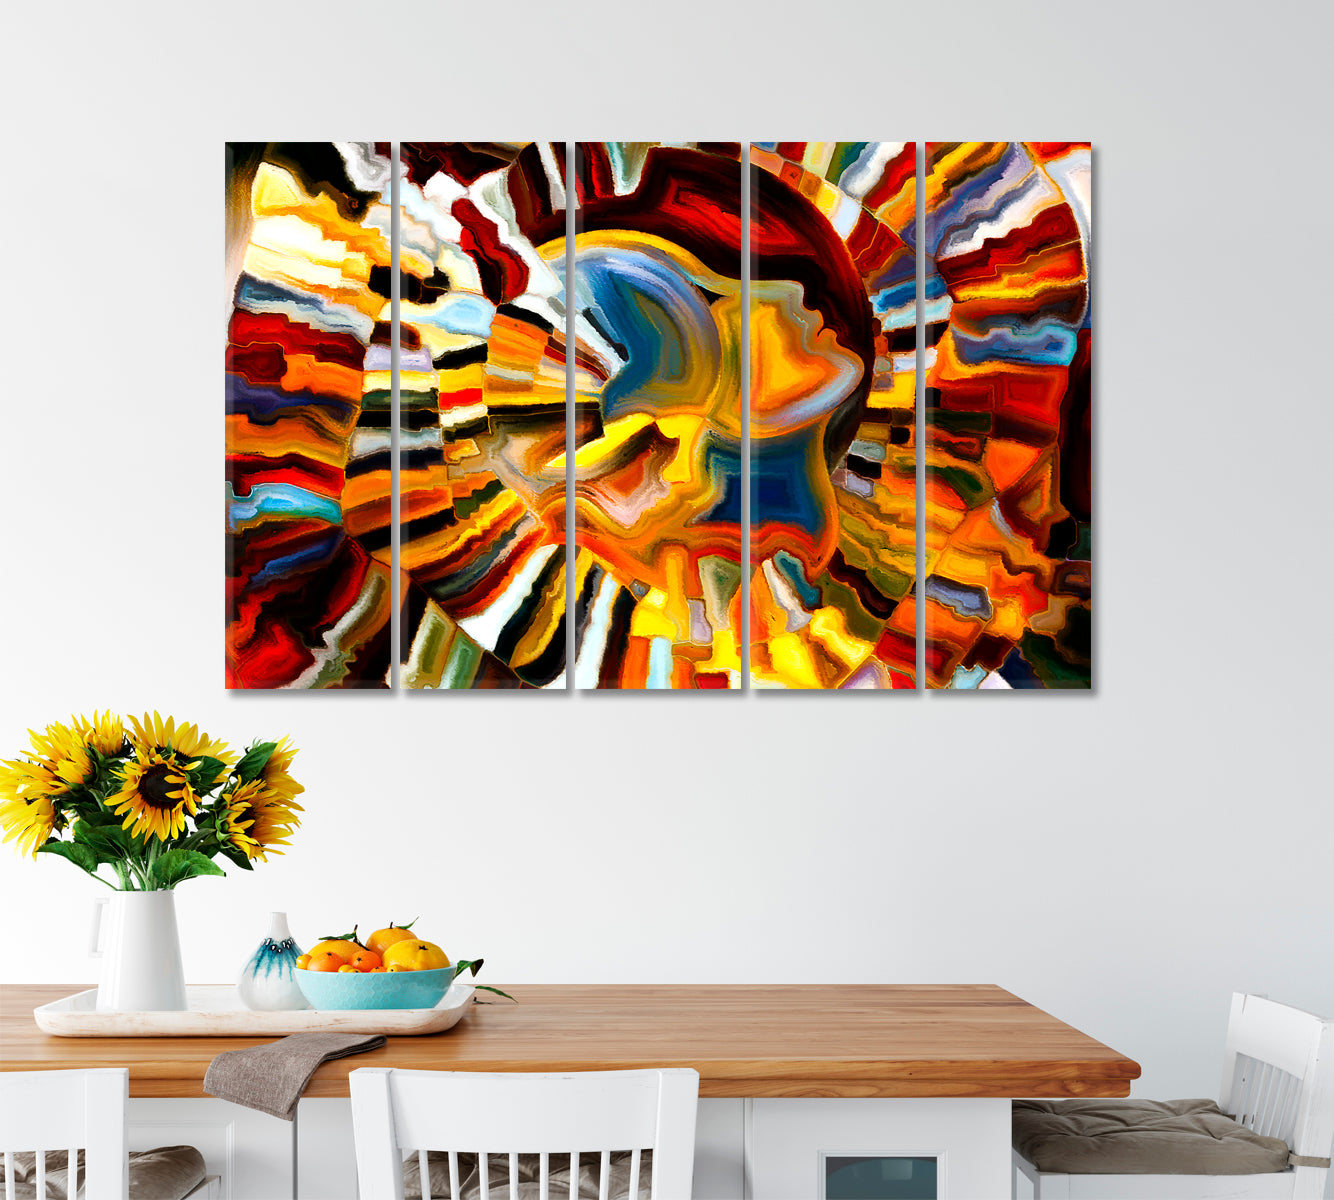 Contemporary Abstraction Contemporary Art Artesty 5 panels 36" x 24" 